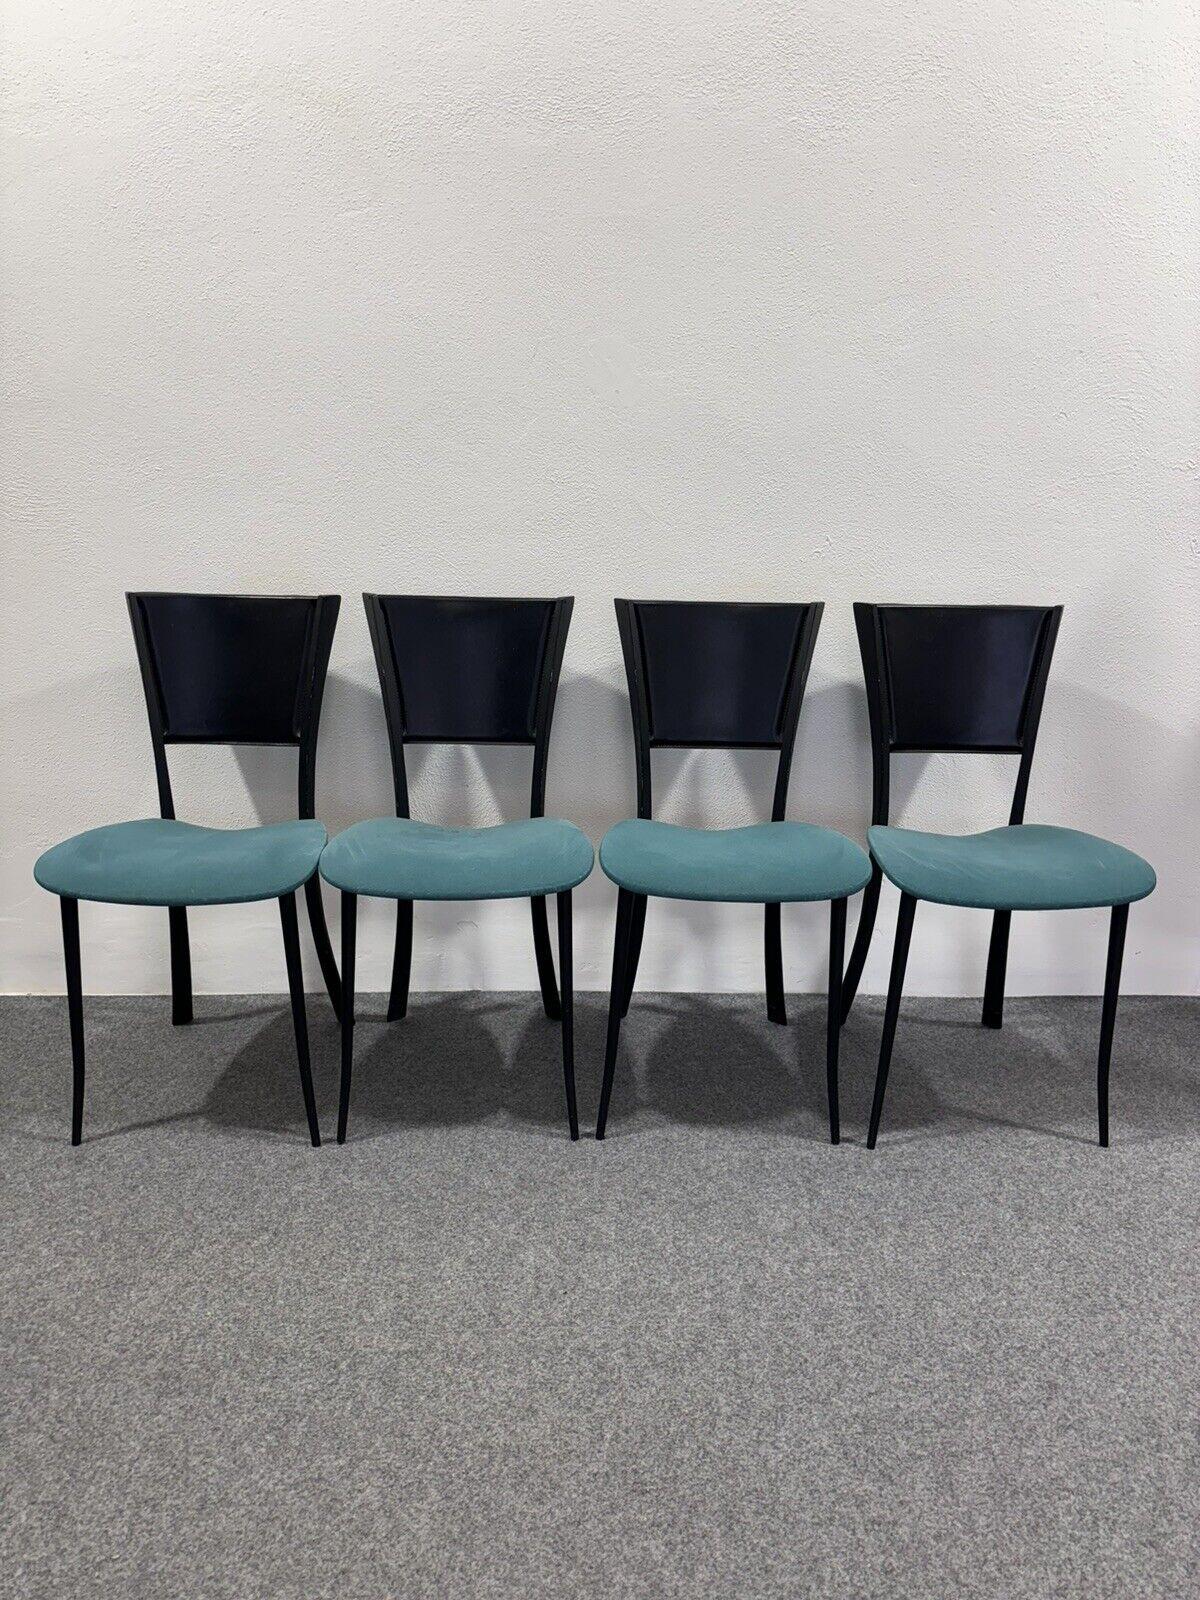 Set Of 4 Postmodern Chairs Modern Design In Good Condition For Sale In Taranto, IT